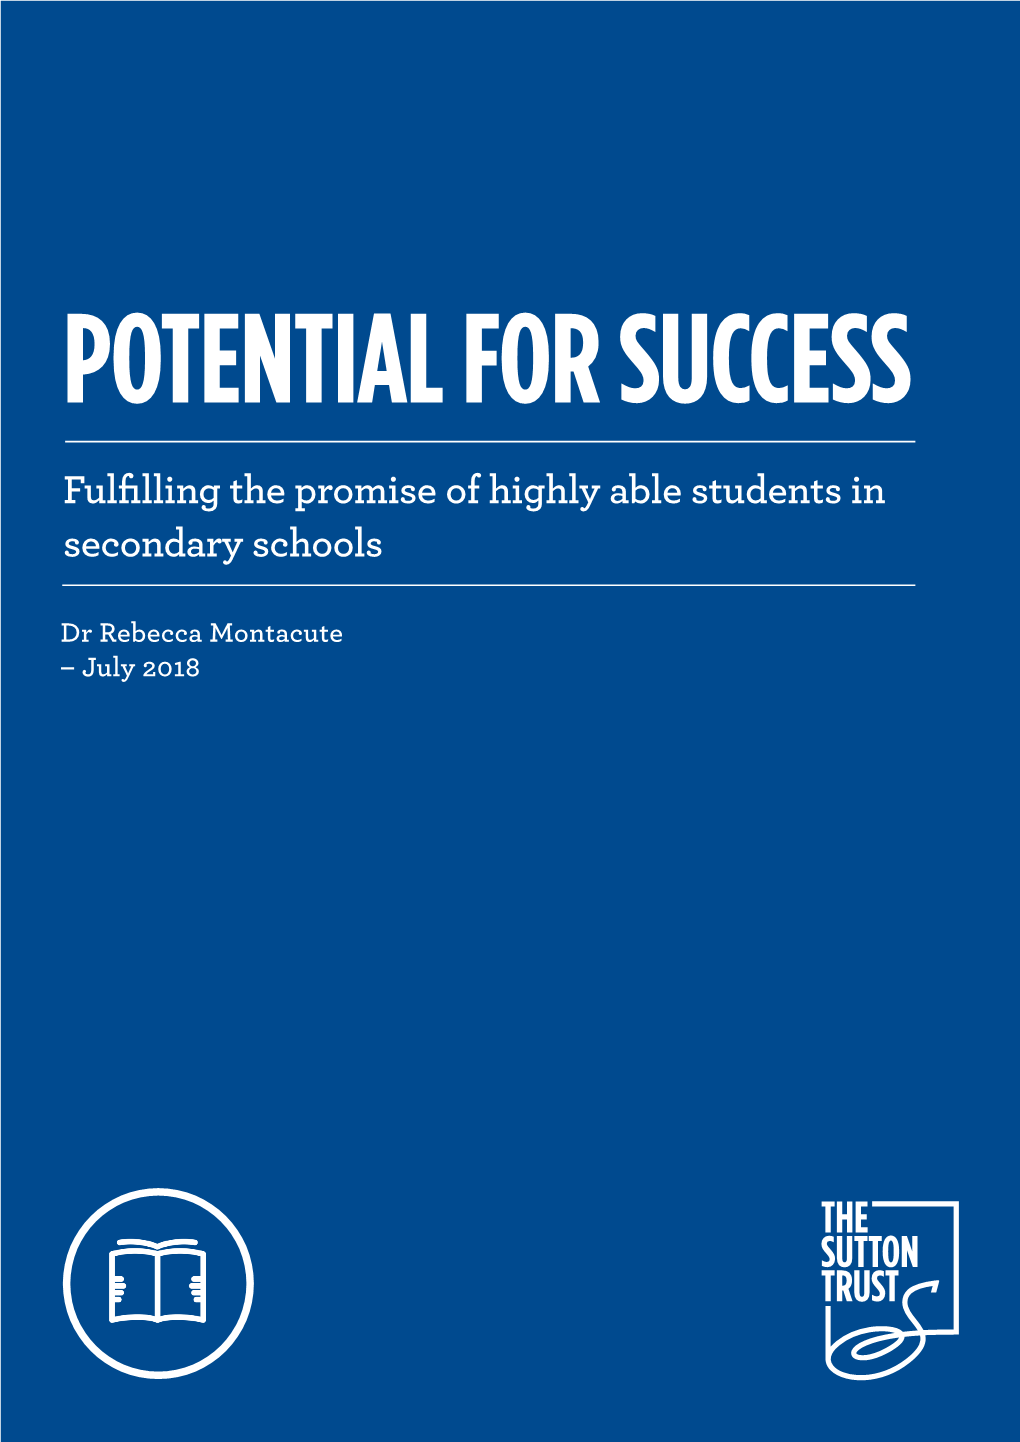 Fulfilling the Promise of Highly Able Students in Secondary Schools